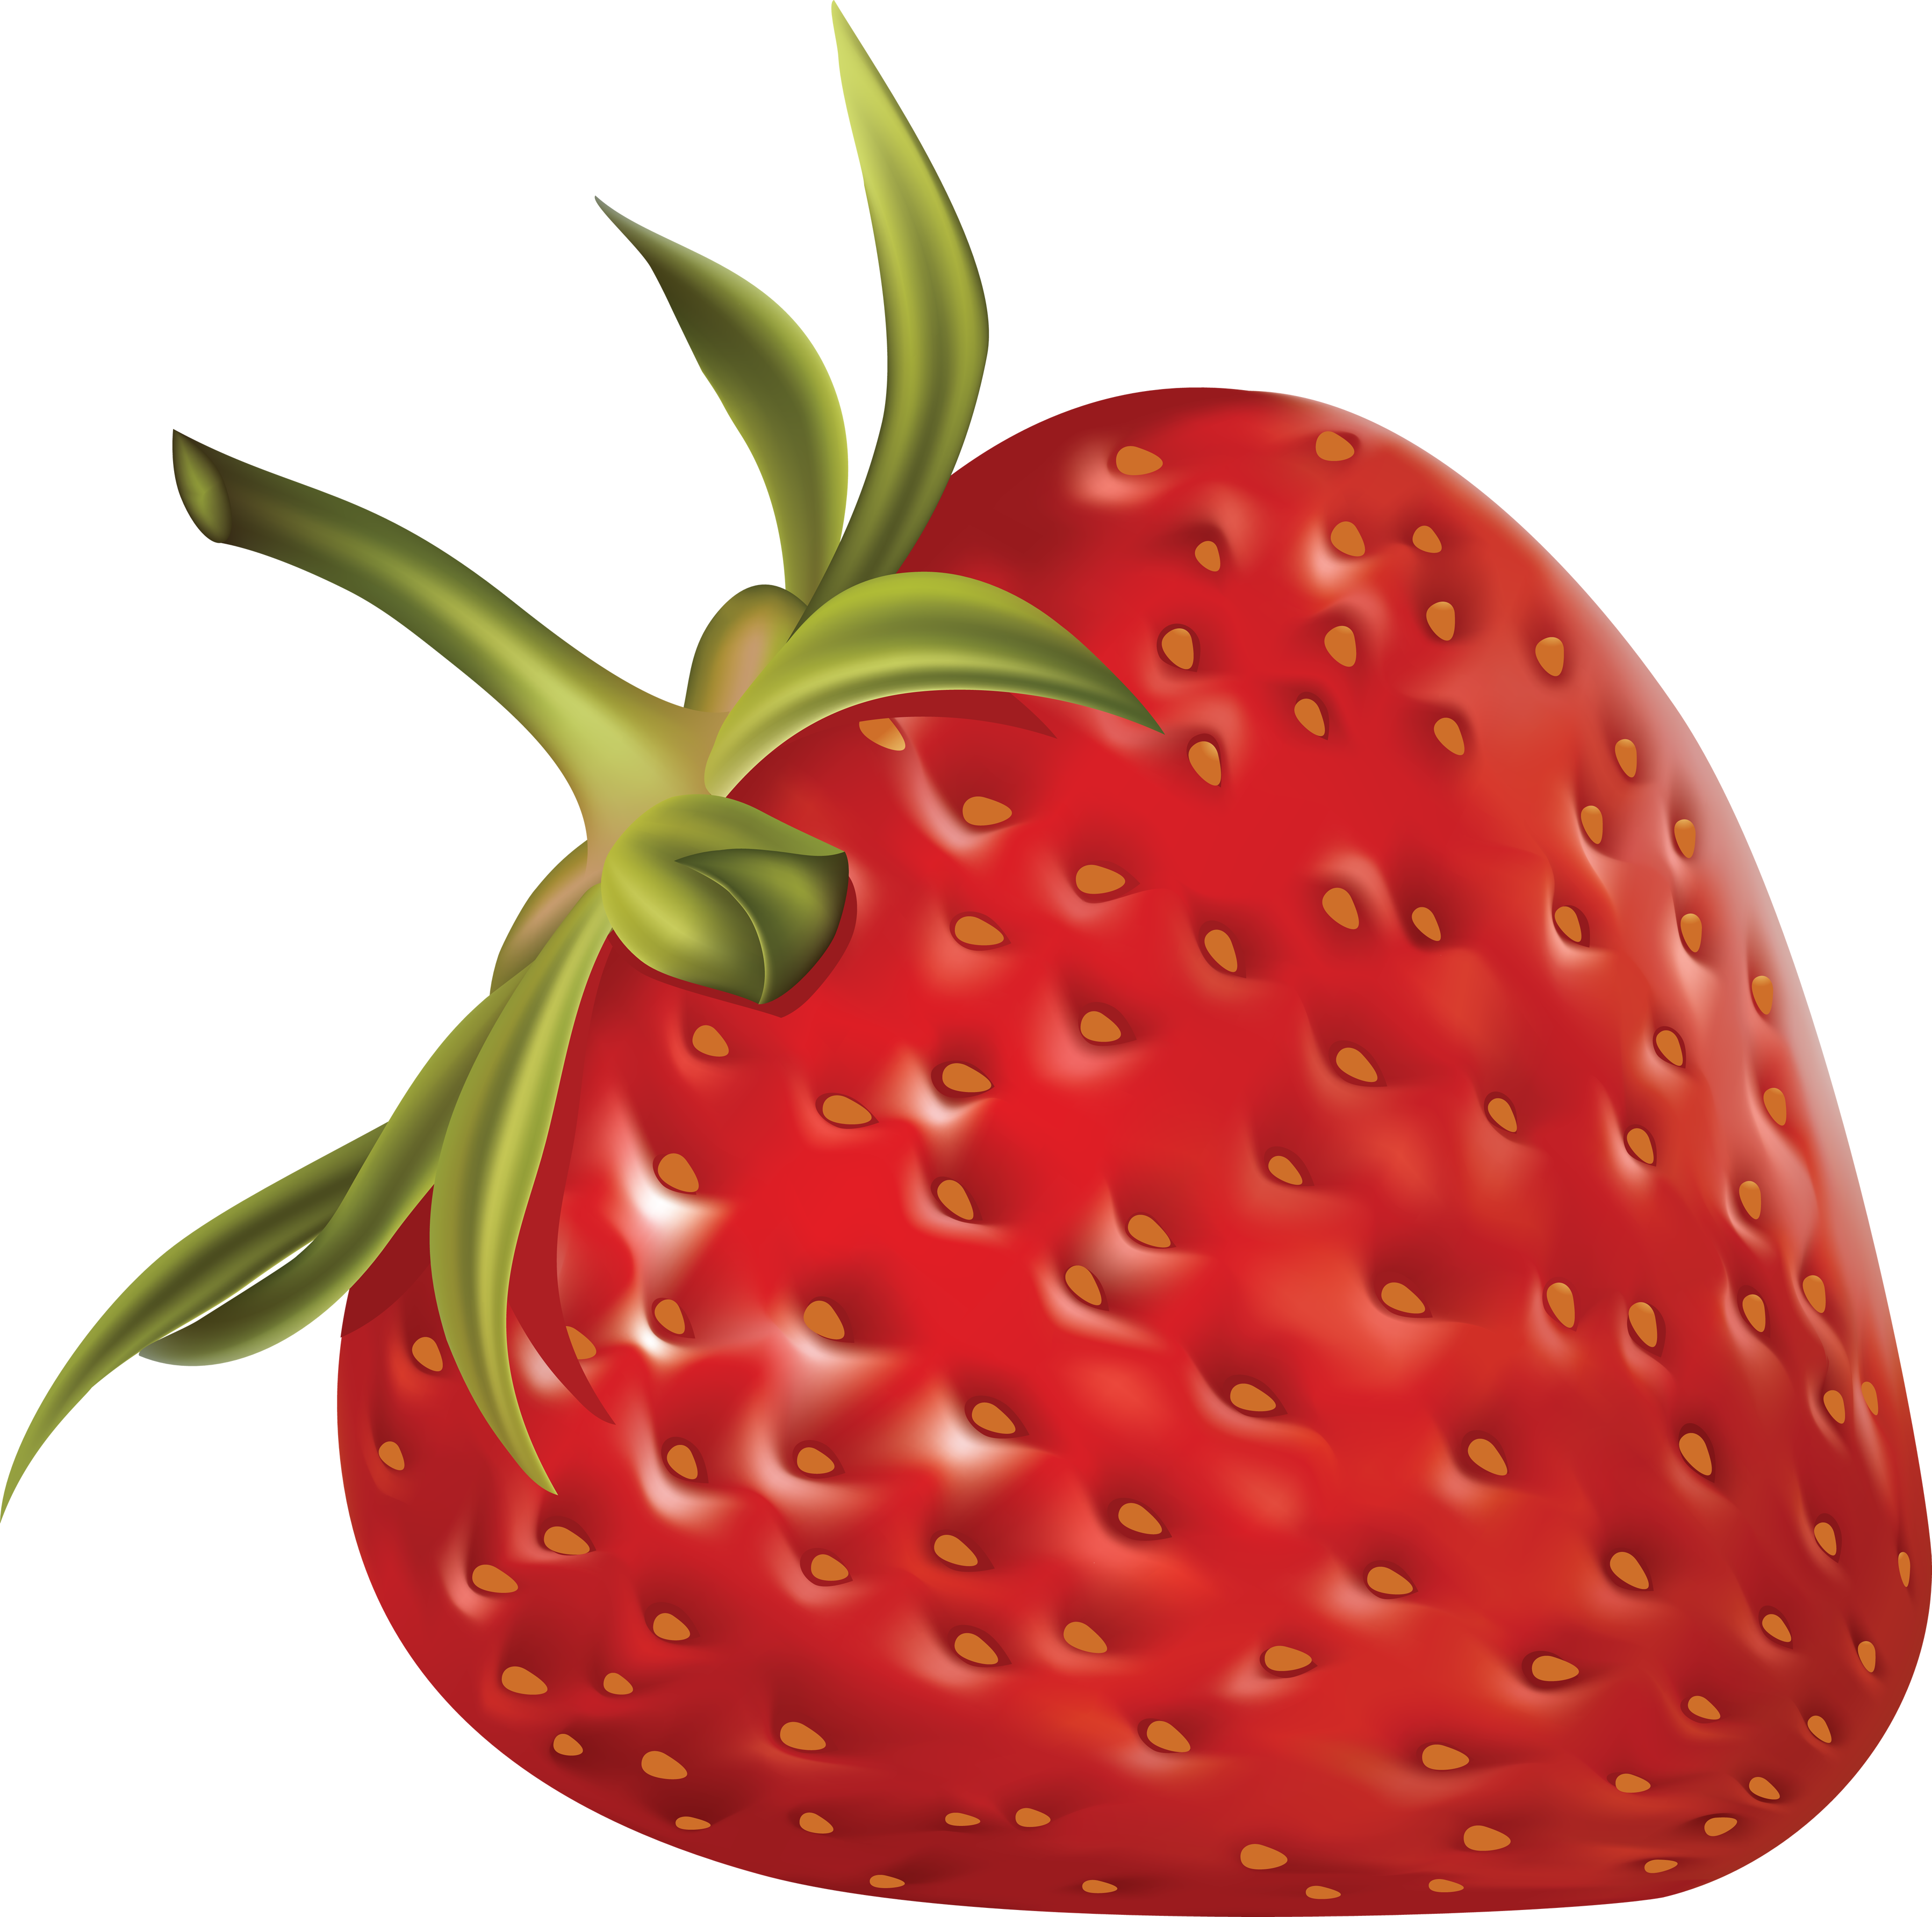 Strawberry image picture download cliparts